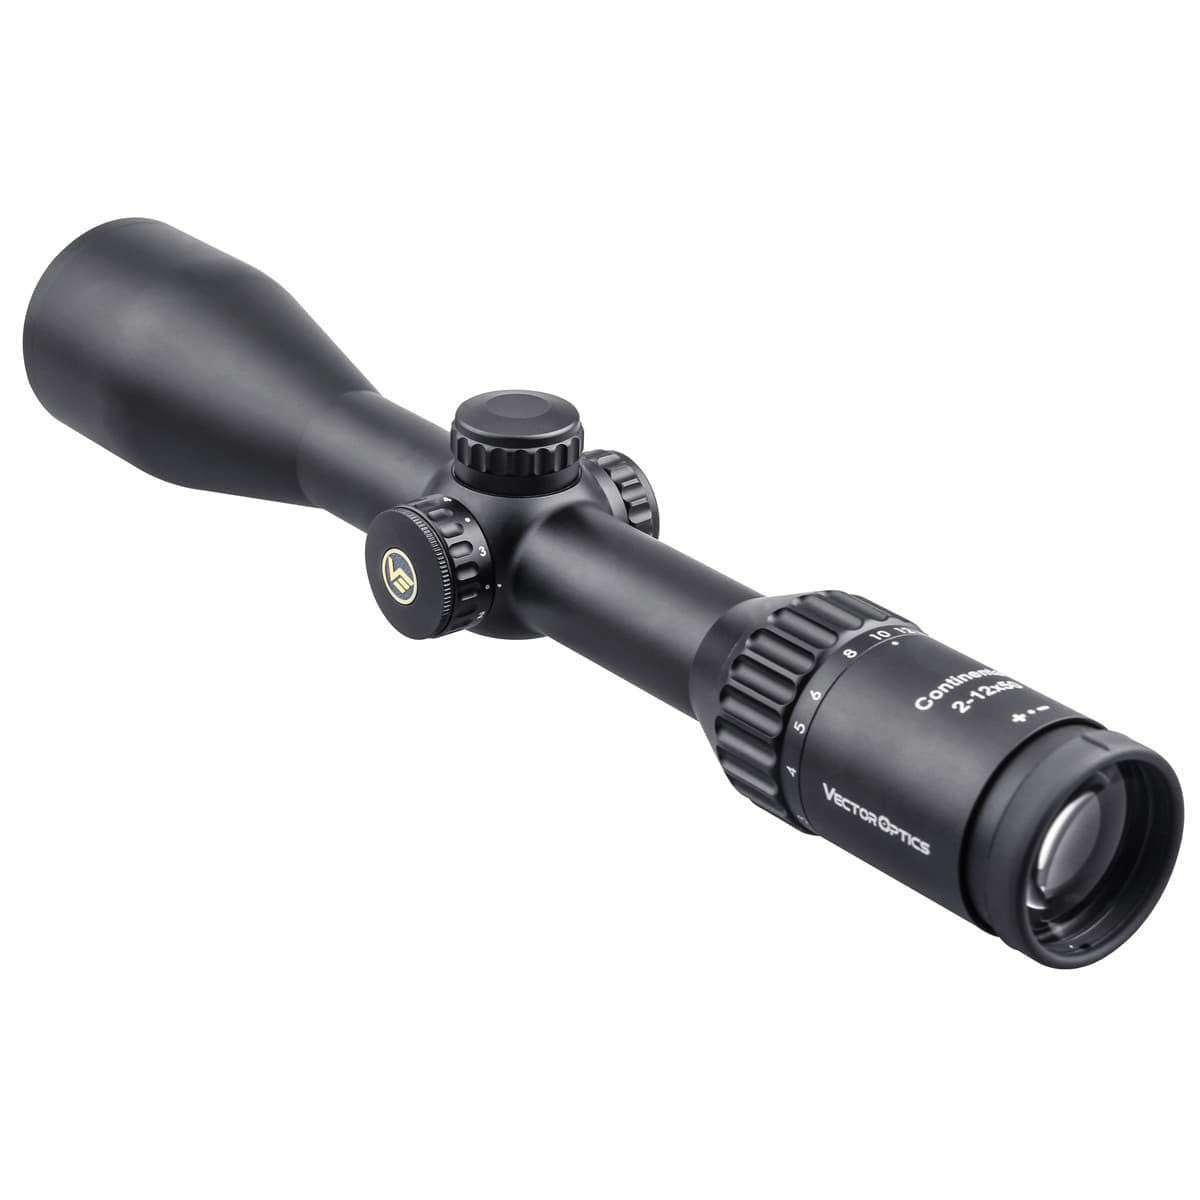 2-12x50 SFP Riflescope | Continental For Hunting | -vector2007.com 